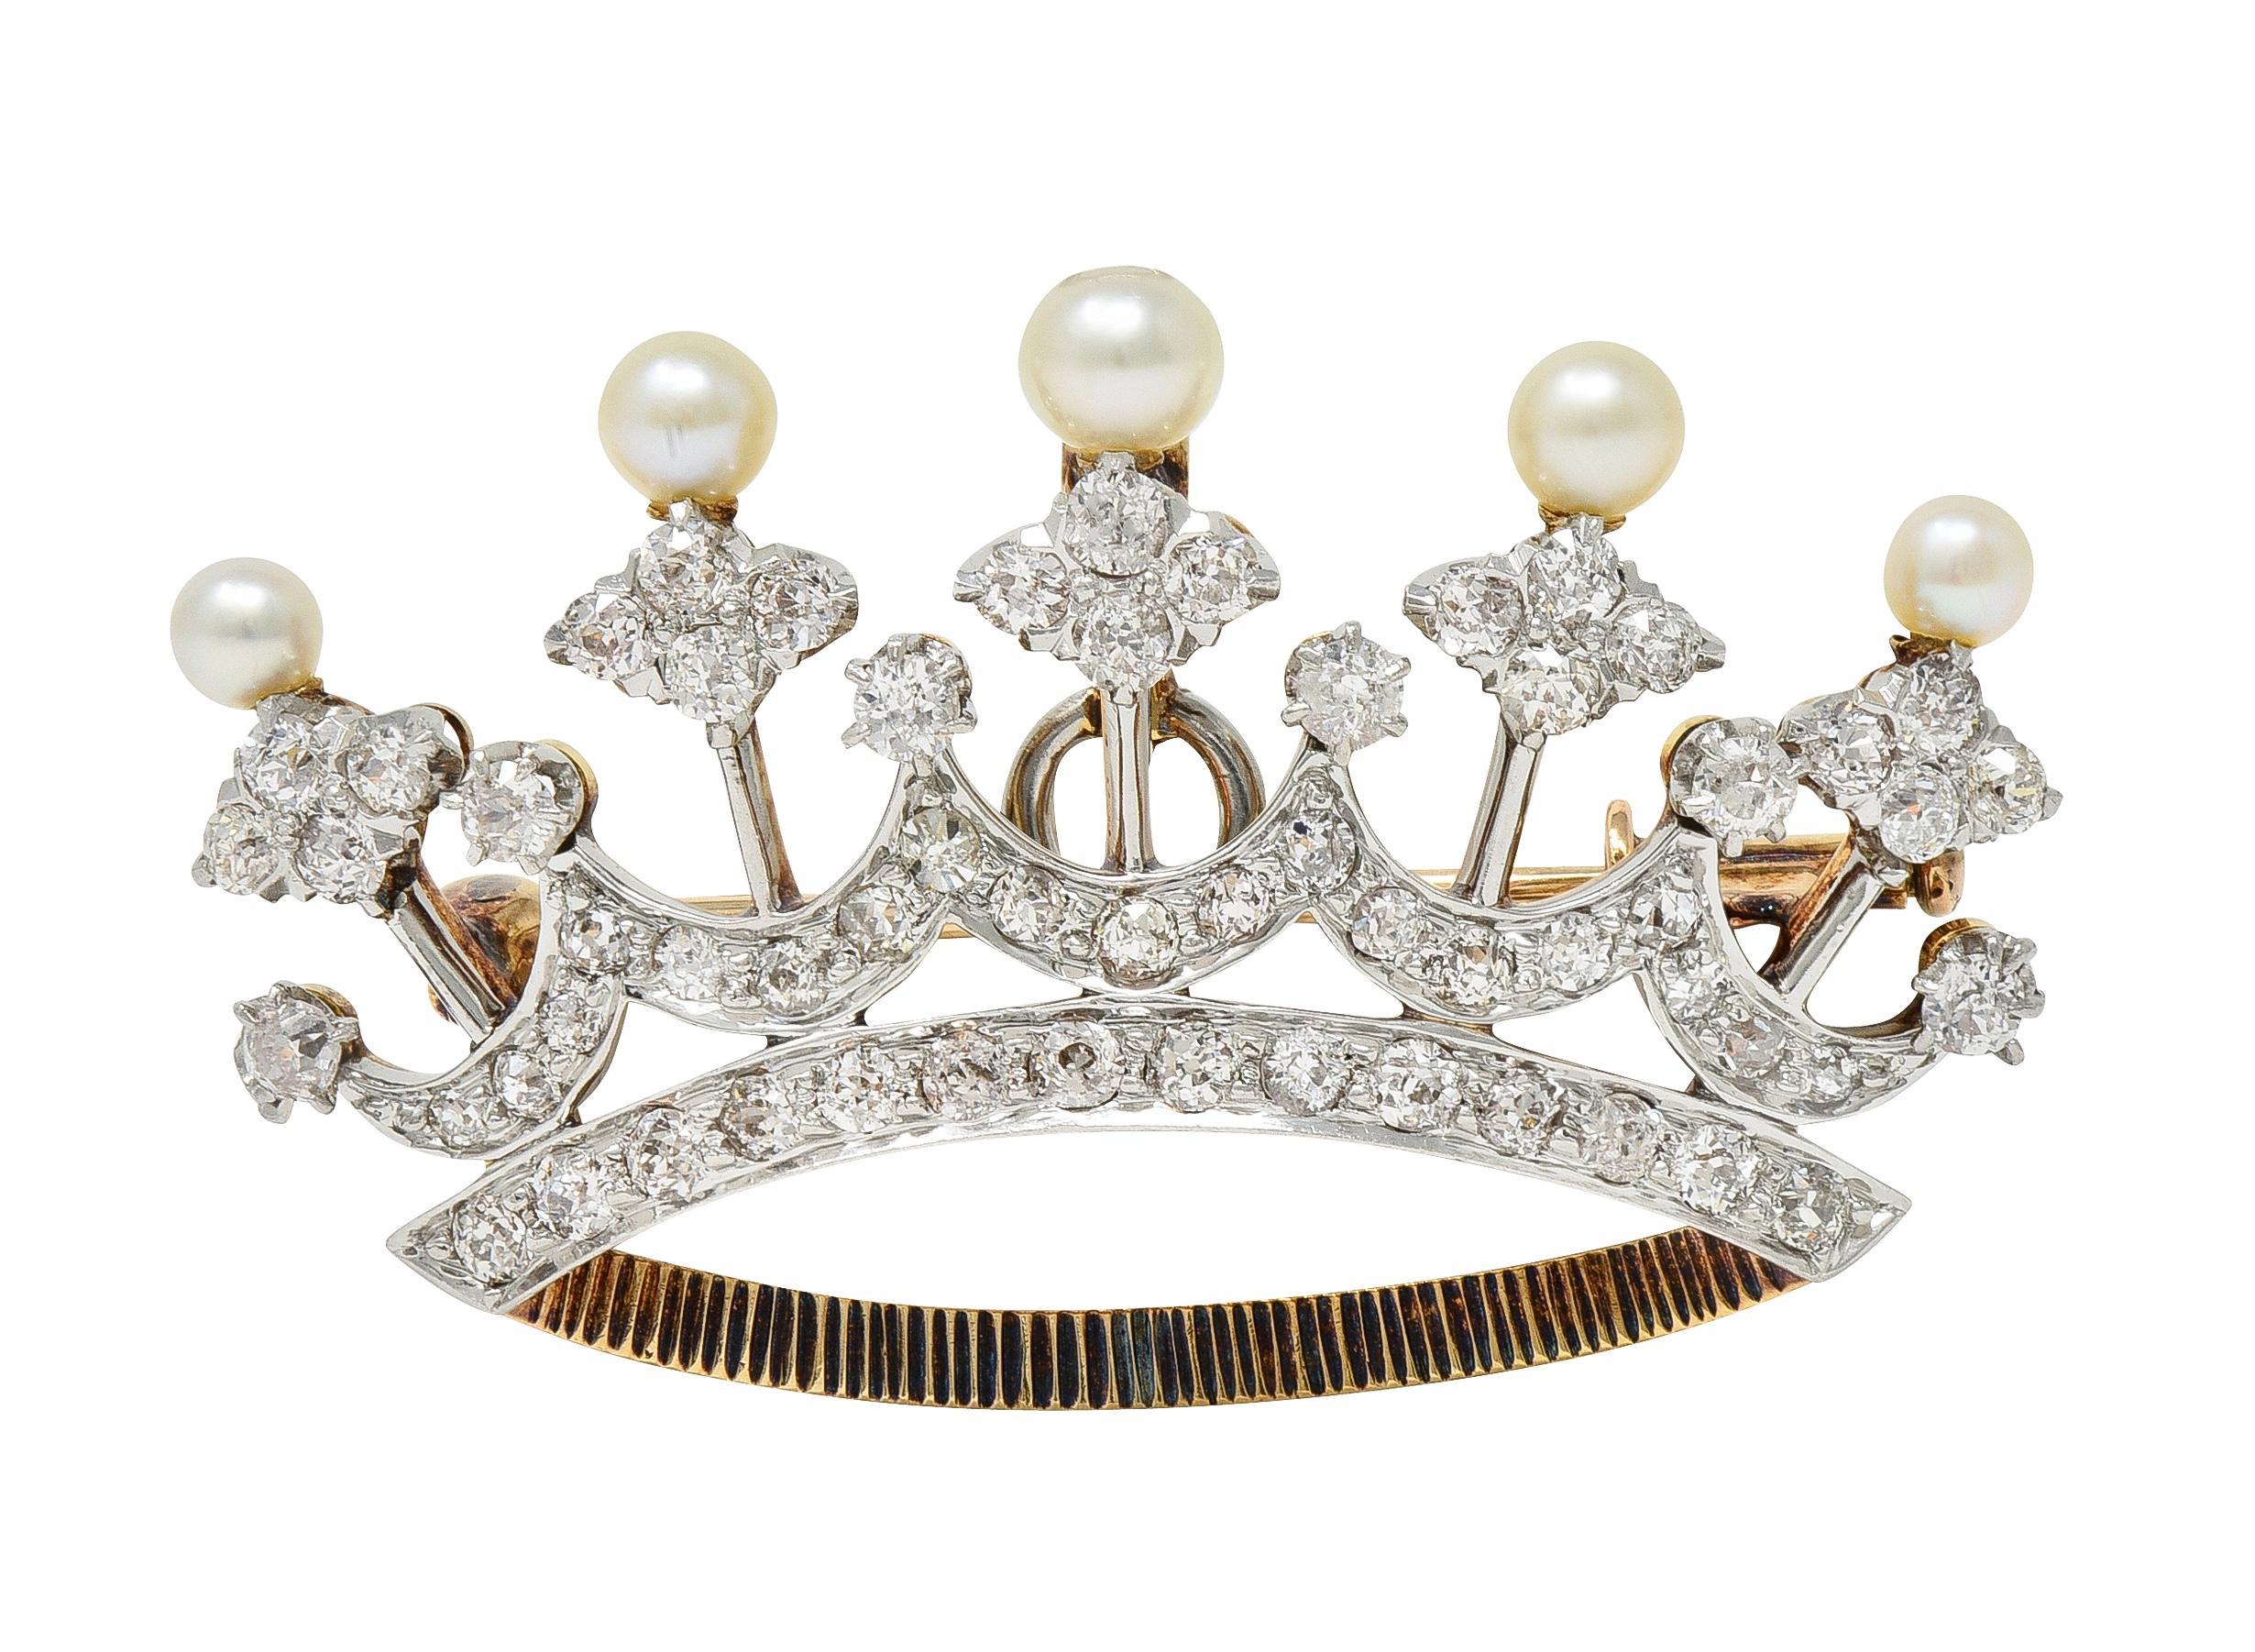 Designed as a pierced dimensional crown with diamonds prong set in platinum throughout 
Old European cut and weighing approximately 1.45 carats total - H to K color with VS2 clarity
Topped with near-round pearls measuring 3.0 to 3.8 mm 
Translucent